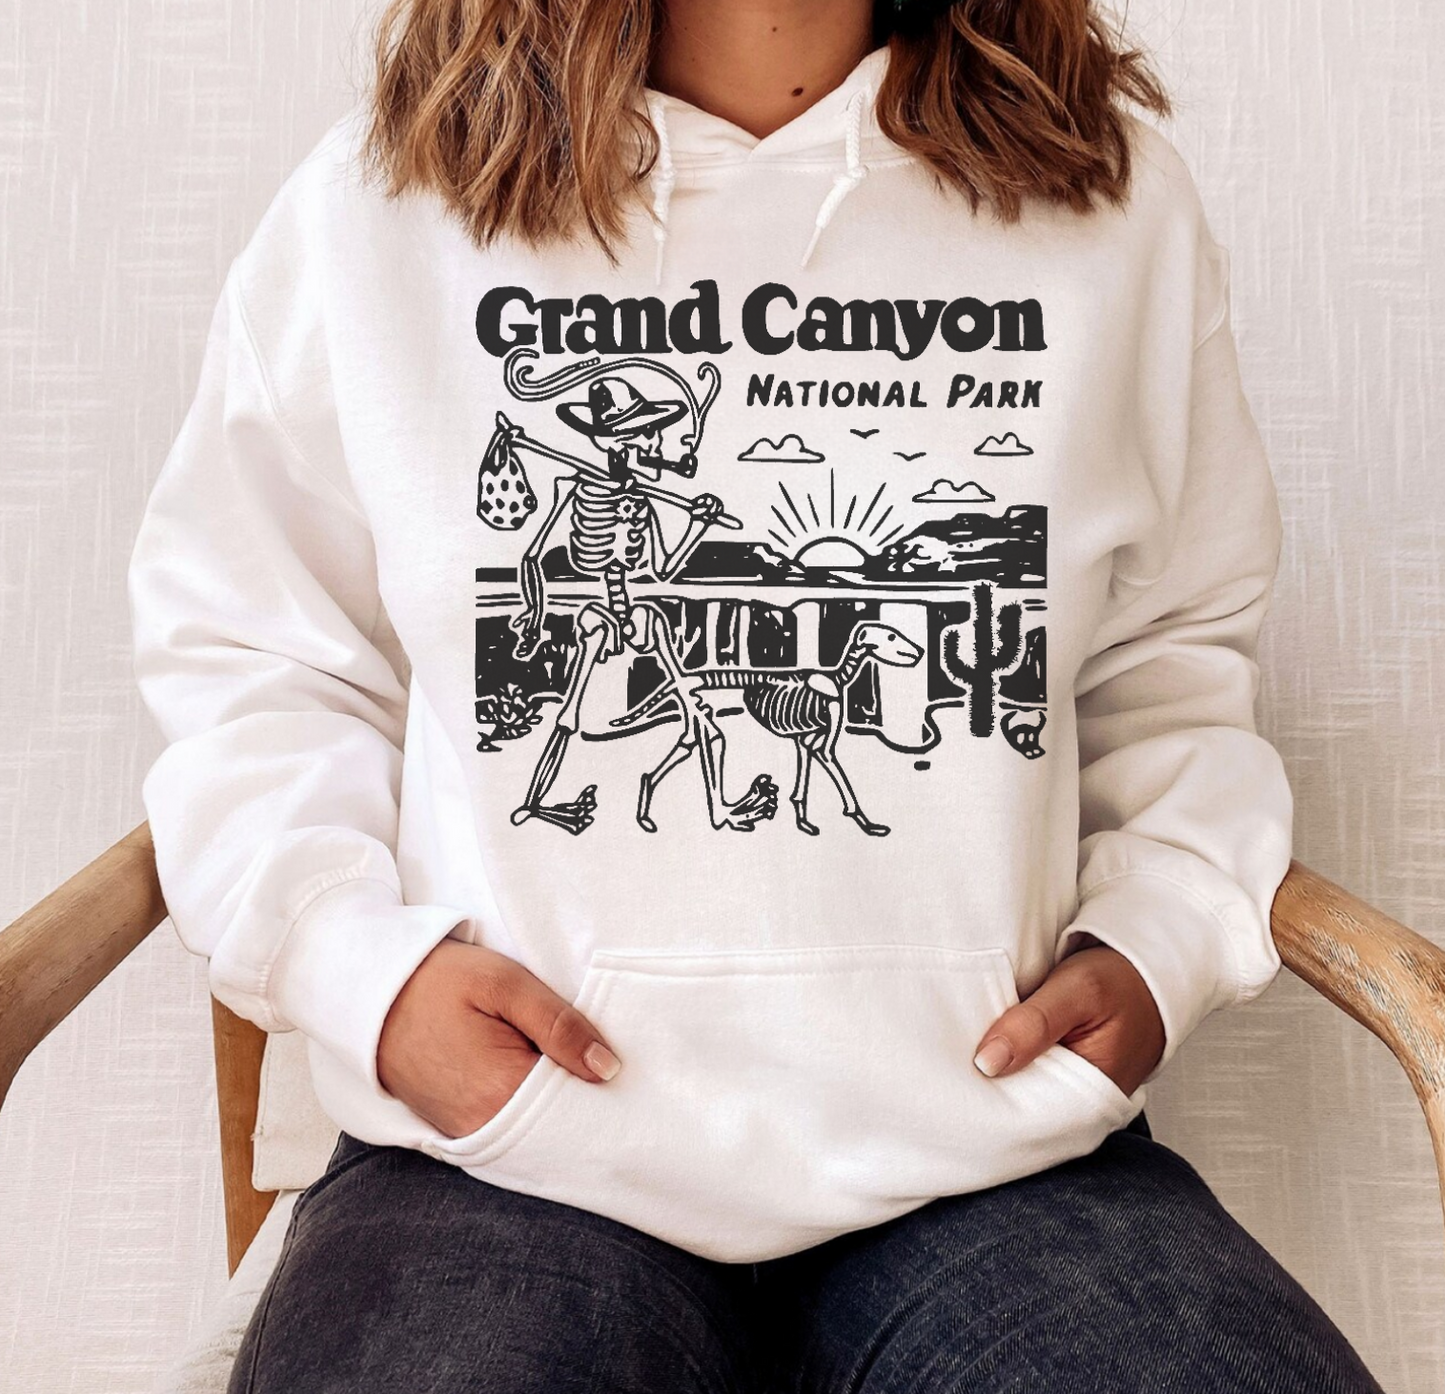 Grand Canyon National Park Unisex Hoodie